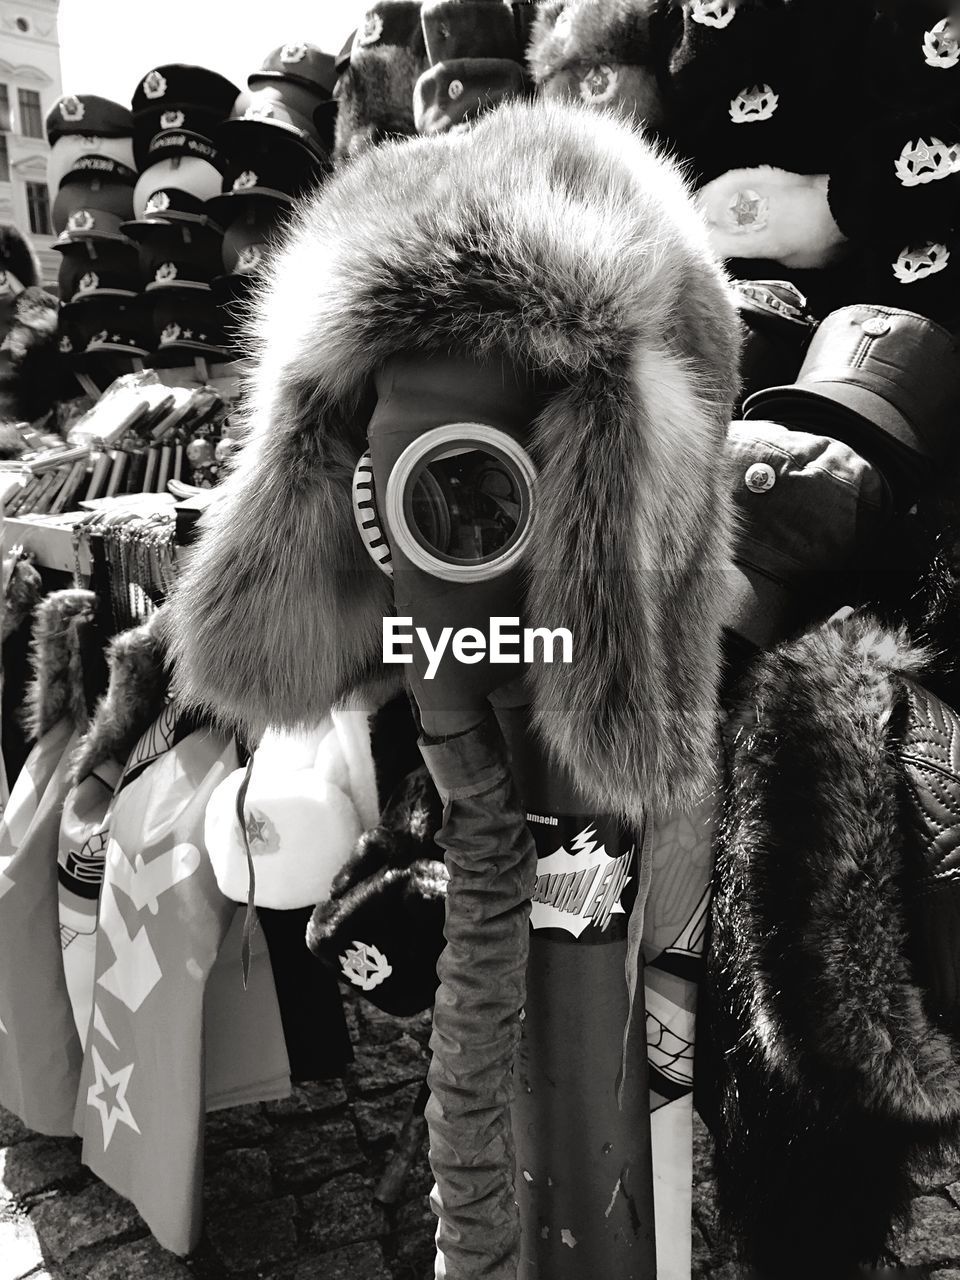 Gas mask with fur and caps for sale in market